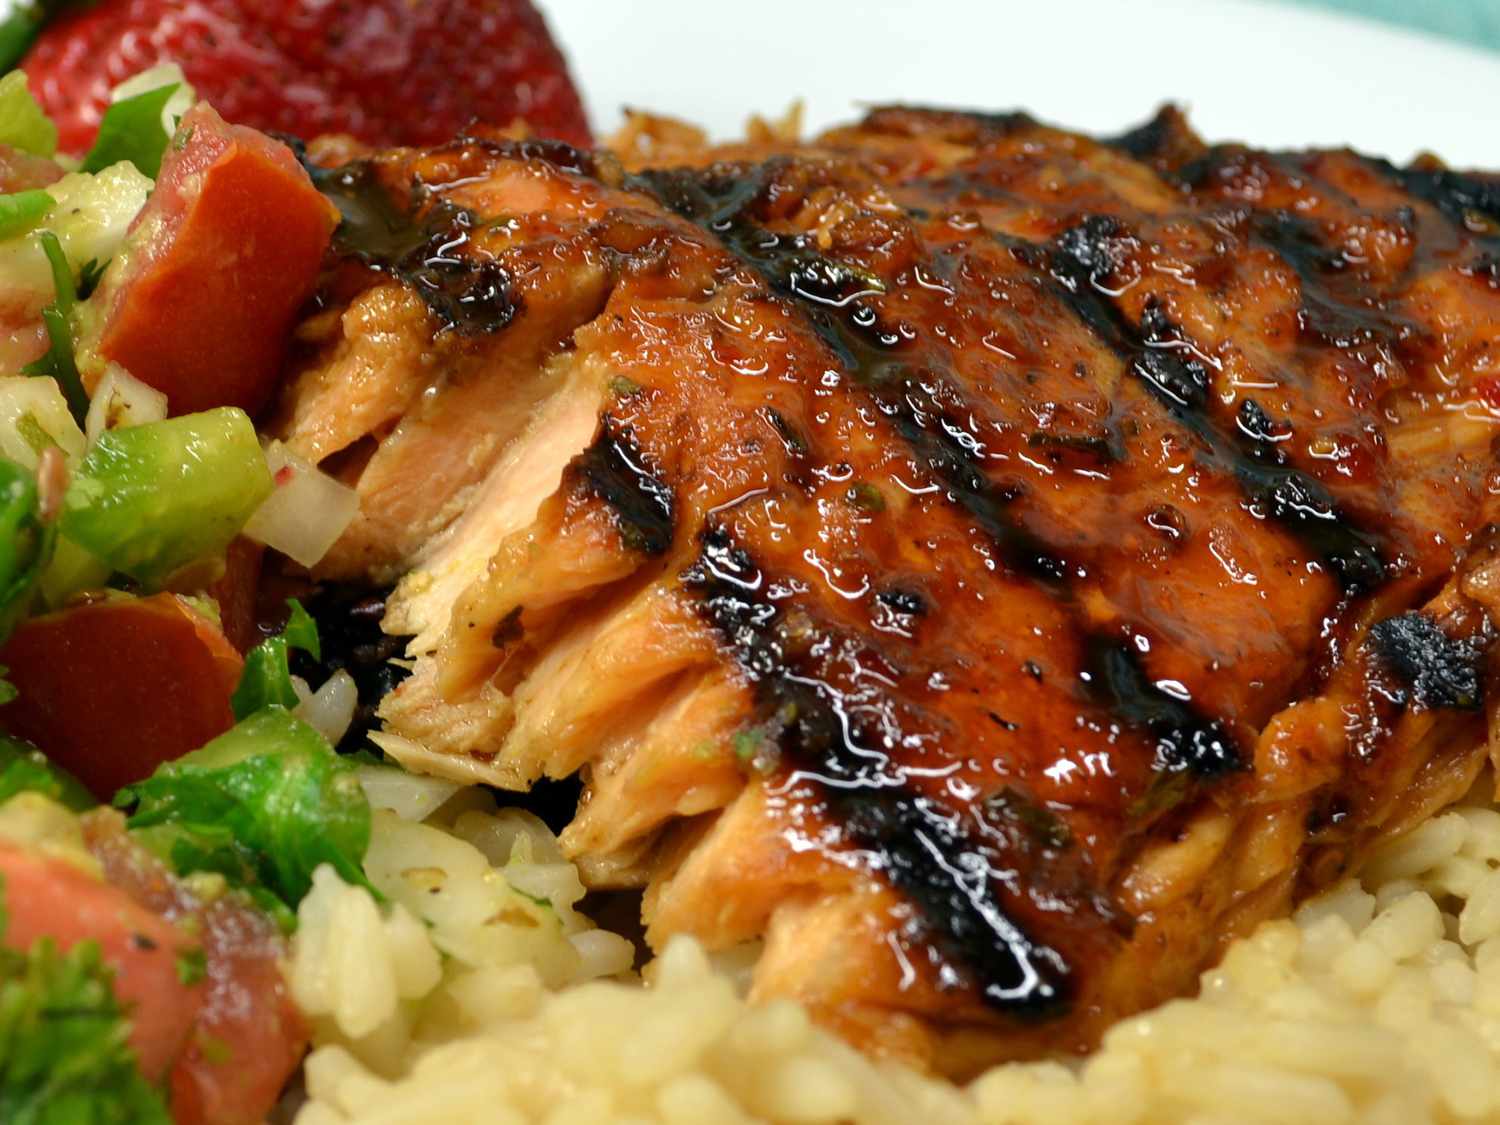 close up view of a Hoisin-Glazed Salmon fillet on rice, with salad and a strawberry